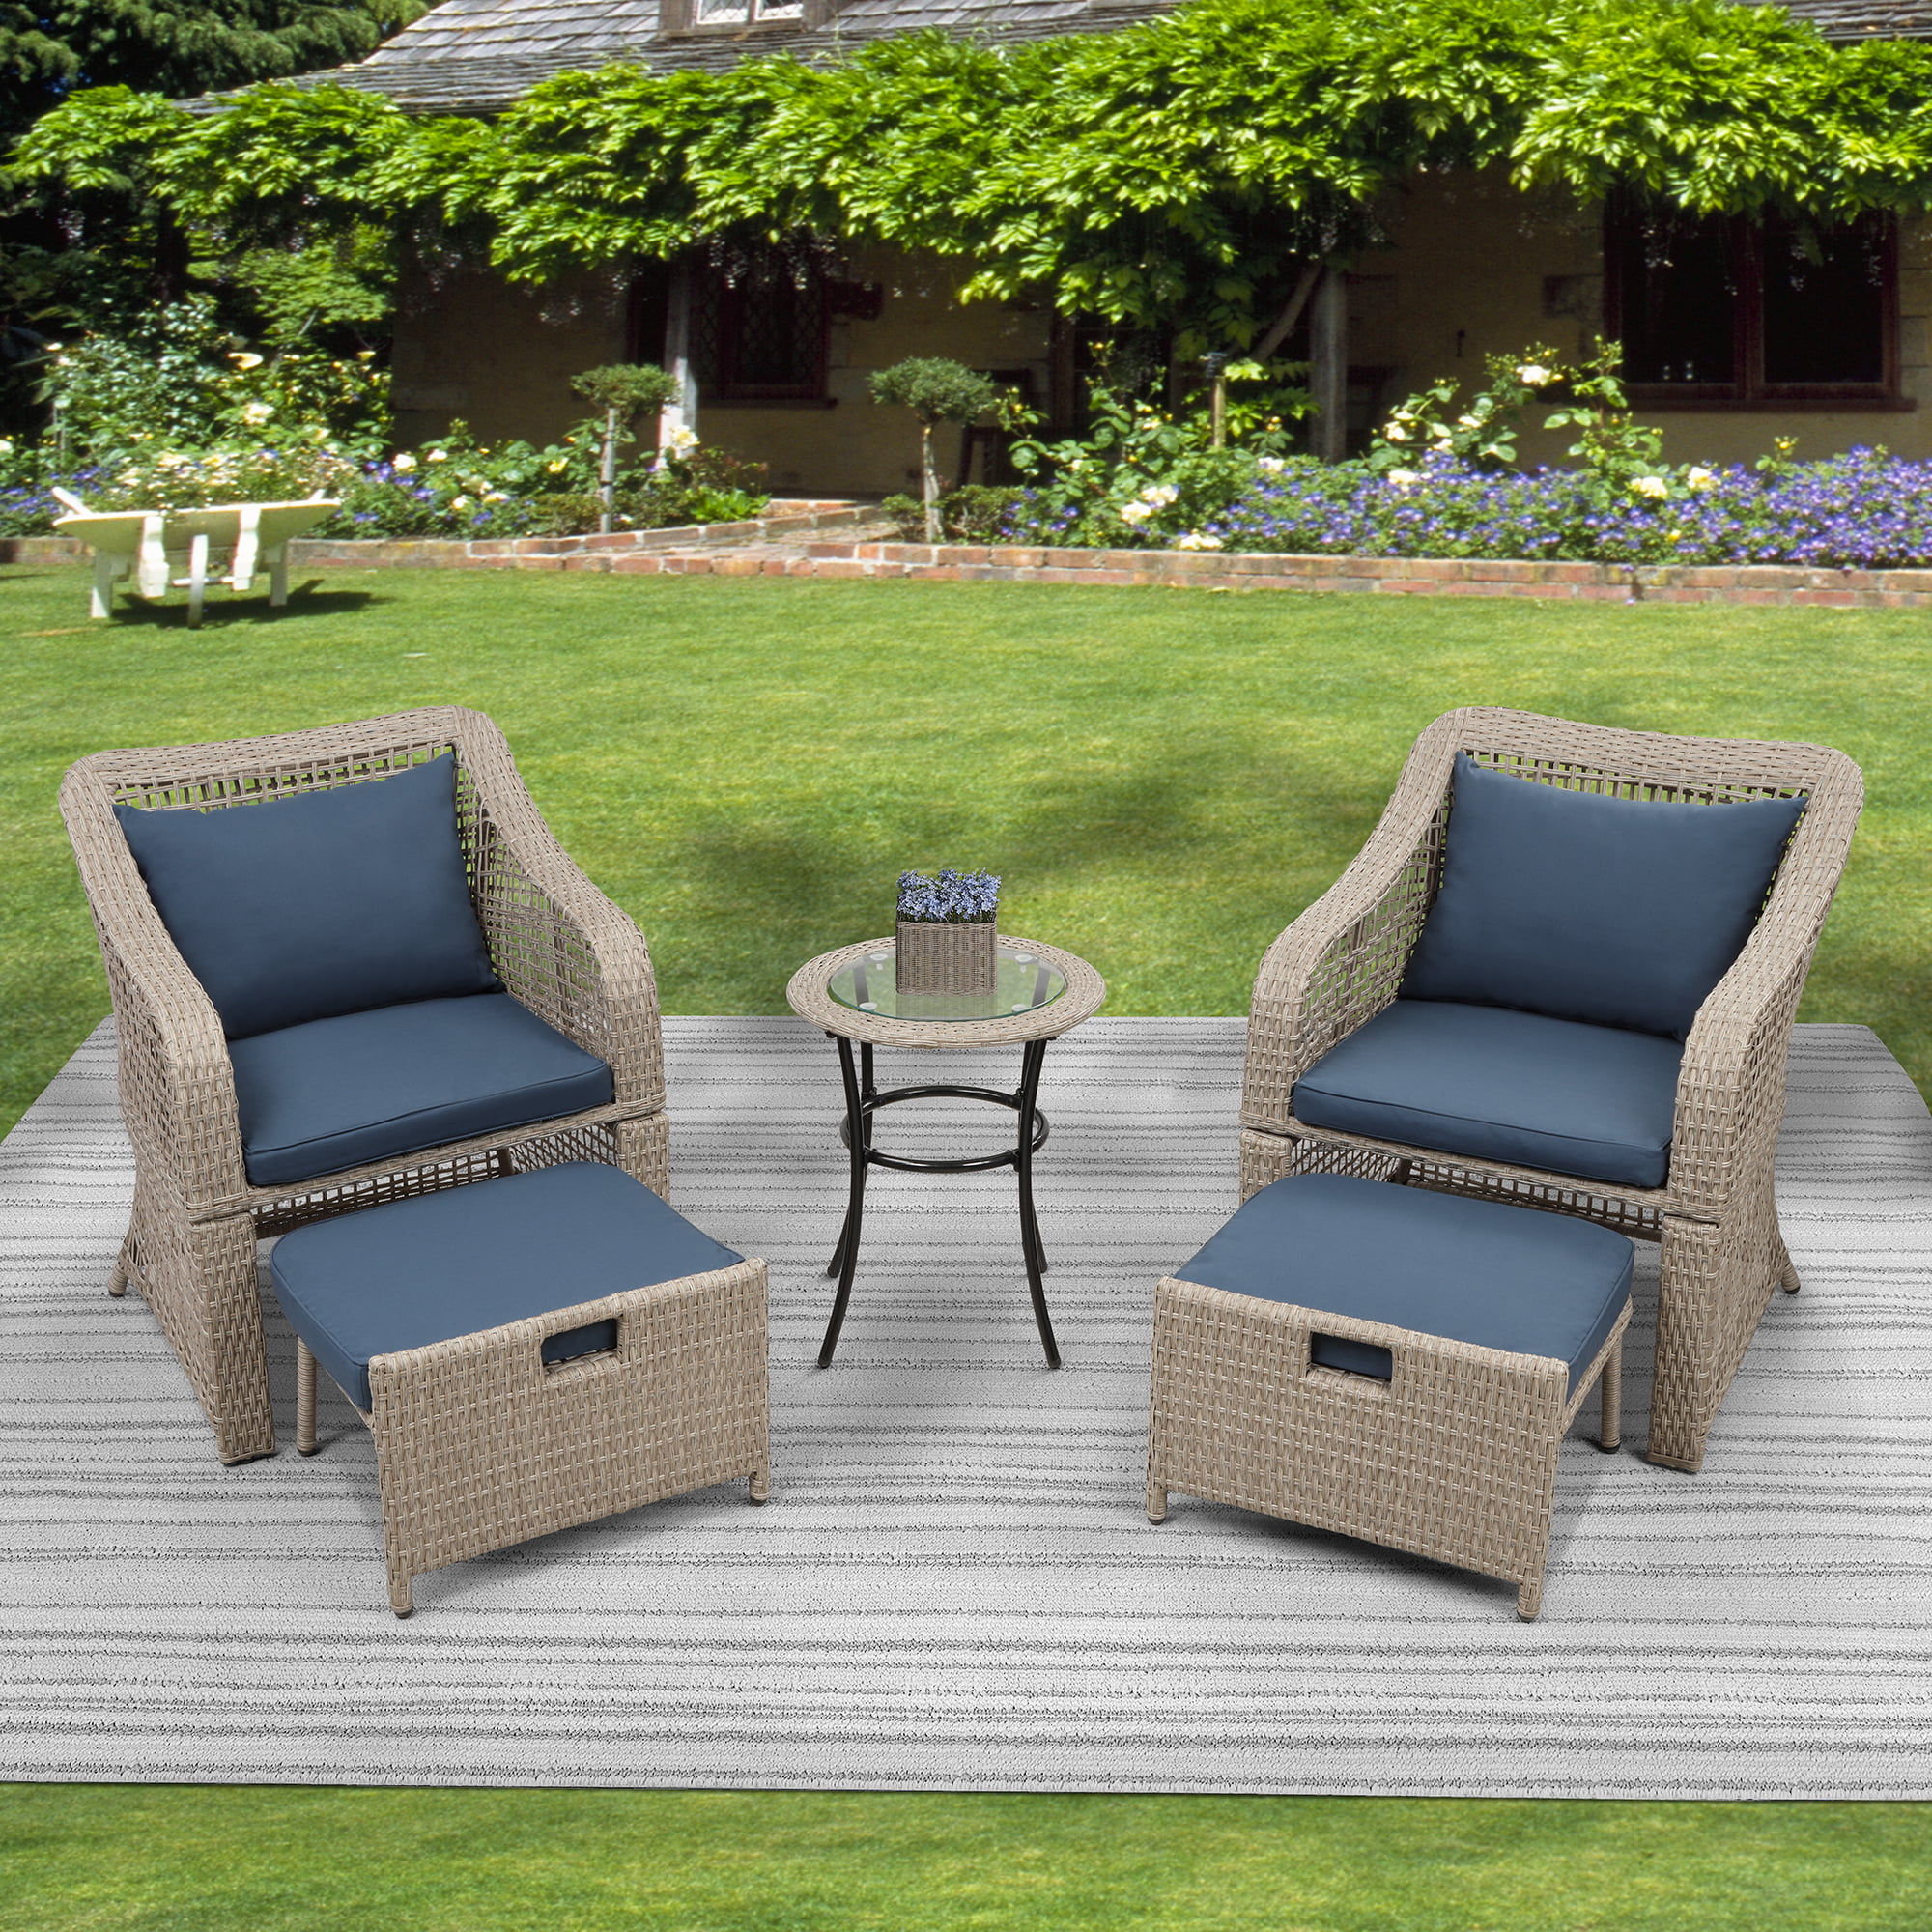 5-Piece Patio Furniture Set, Outdoor Bistro Set, Chairs and Table Patio